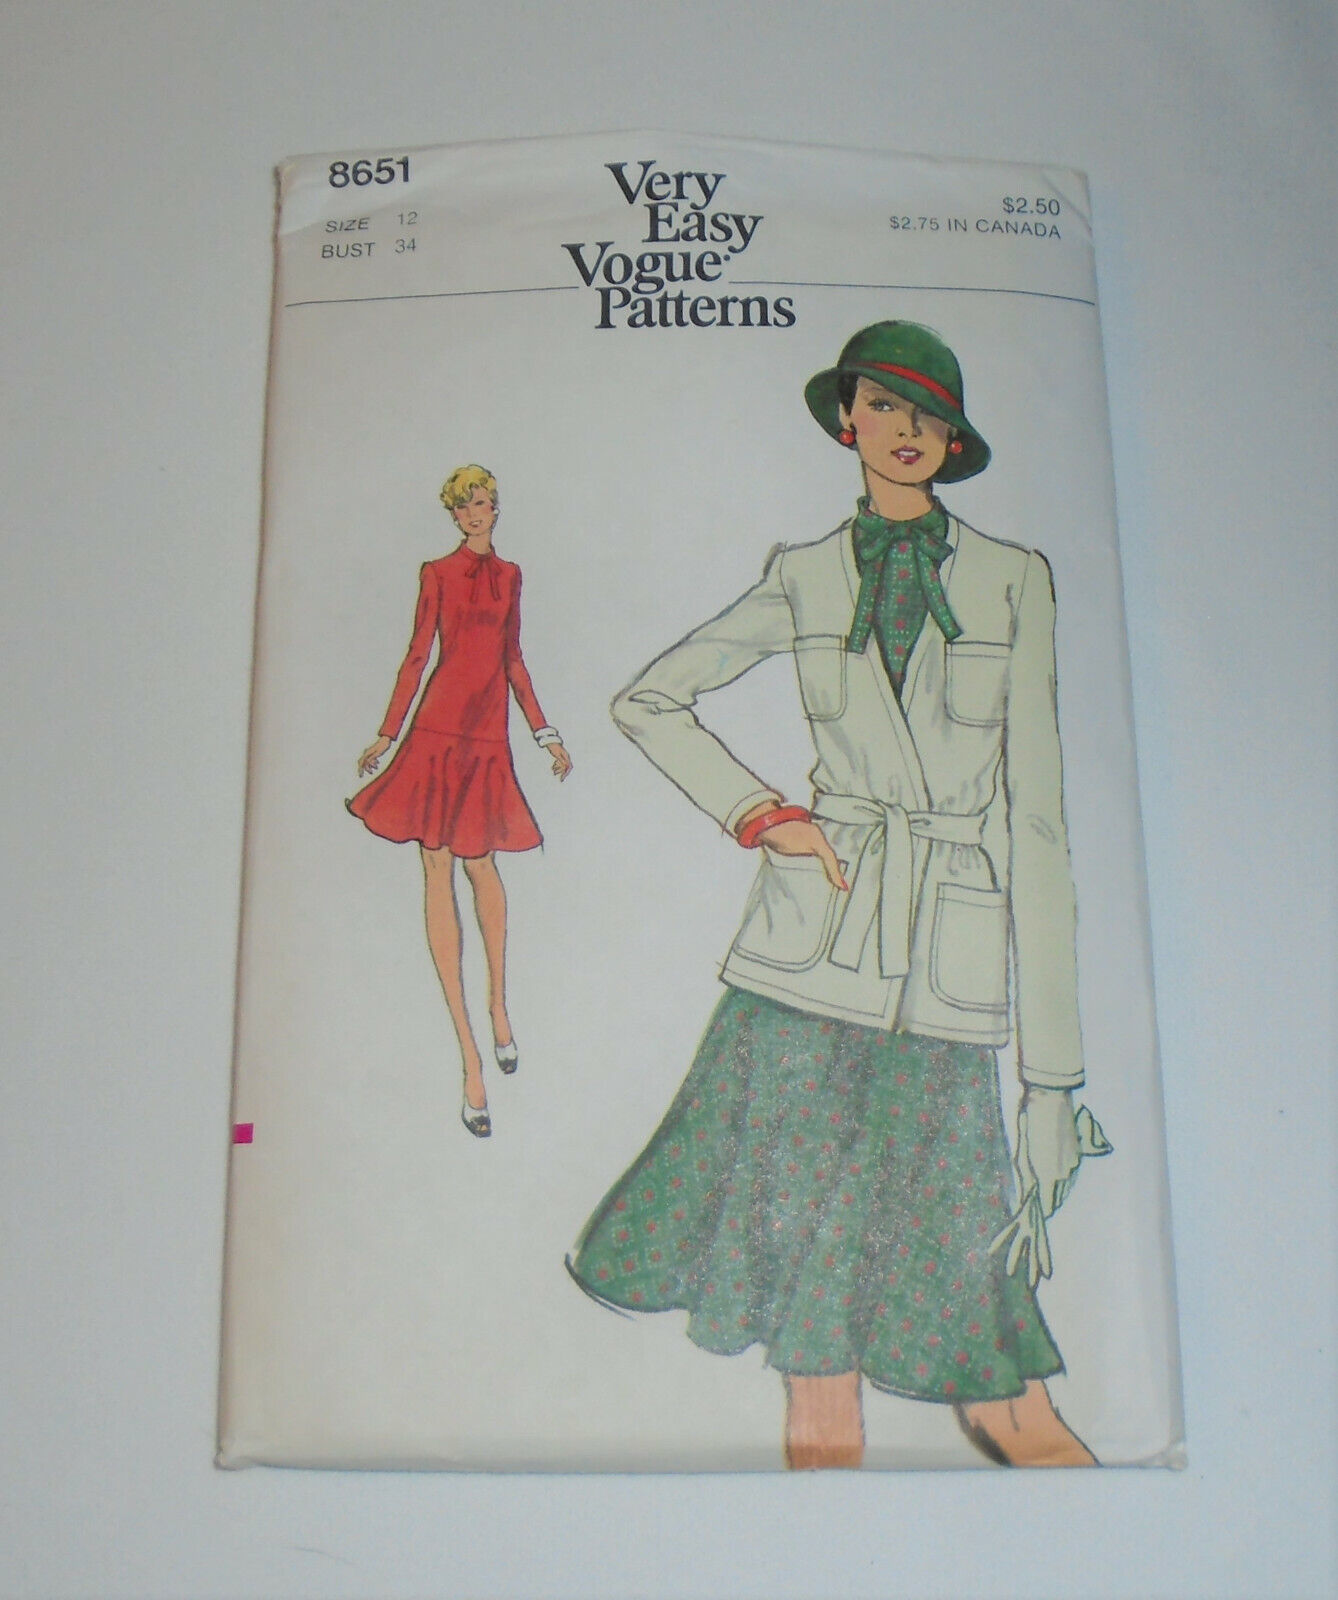 Primary image for 1973 Vogue Pattern Very Easy #8651 Size 12 Bust 34 Dress Jacket Uncut